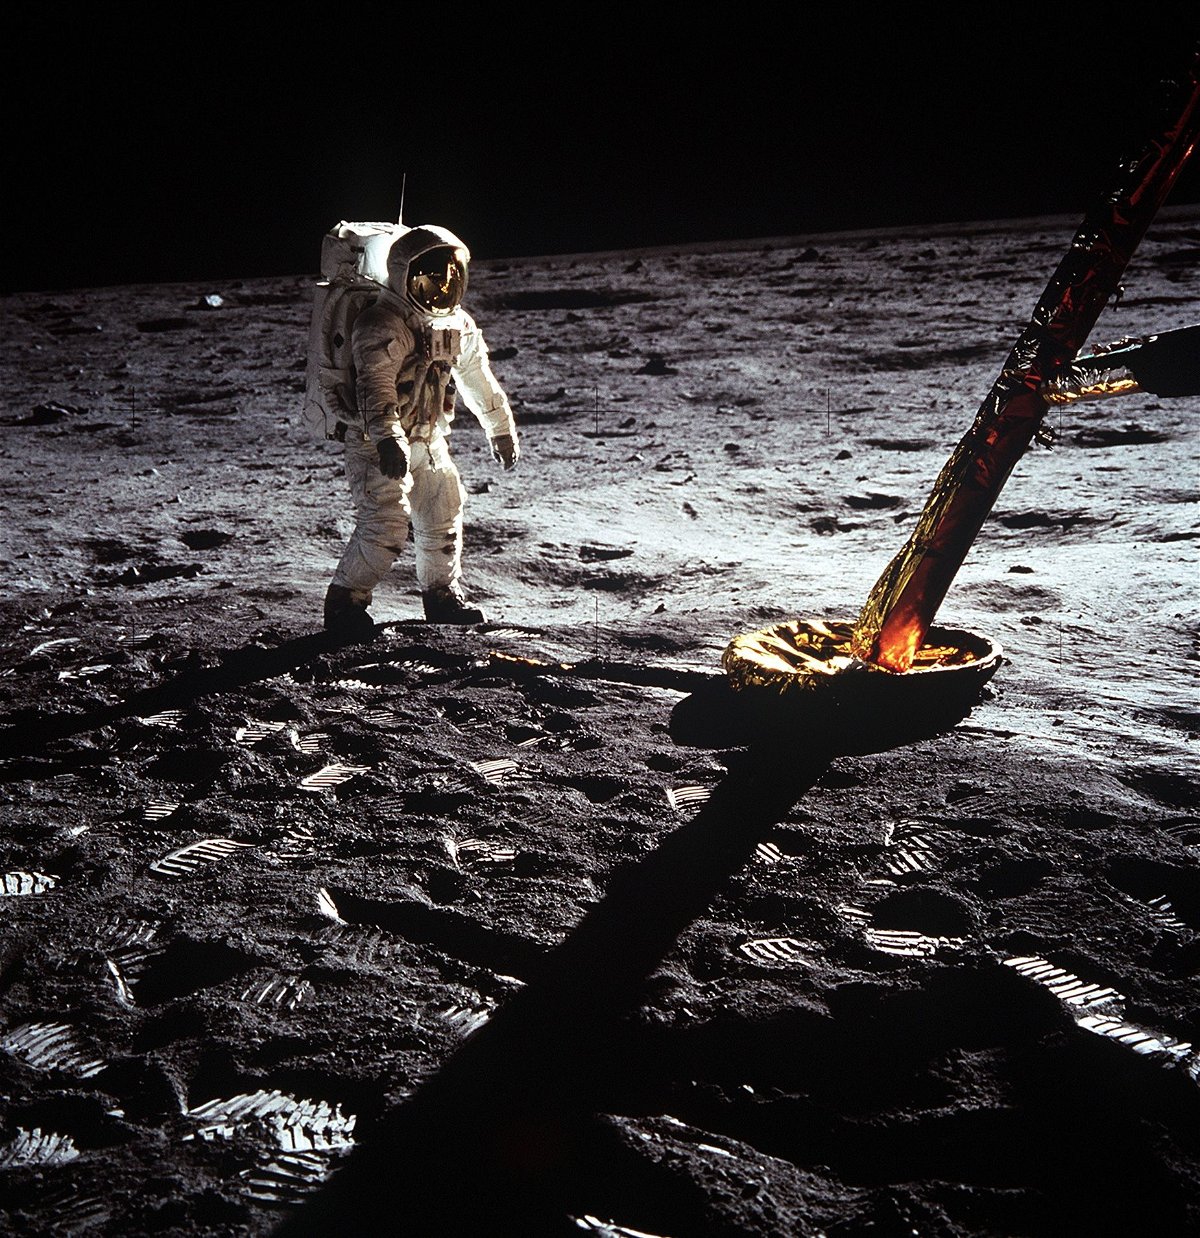 Astronaut Buzz Aldrin is pictured here walking on the surface of the moon near a leg of the lunar module during the Apollo 11 mission.